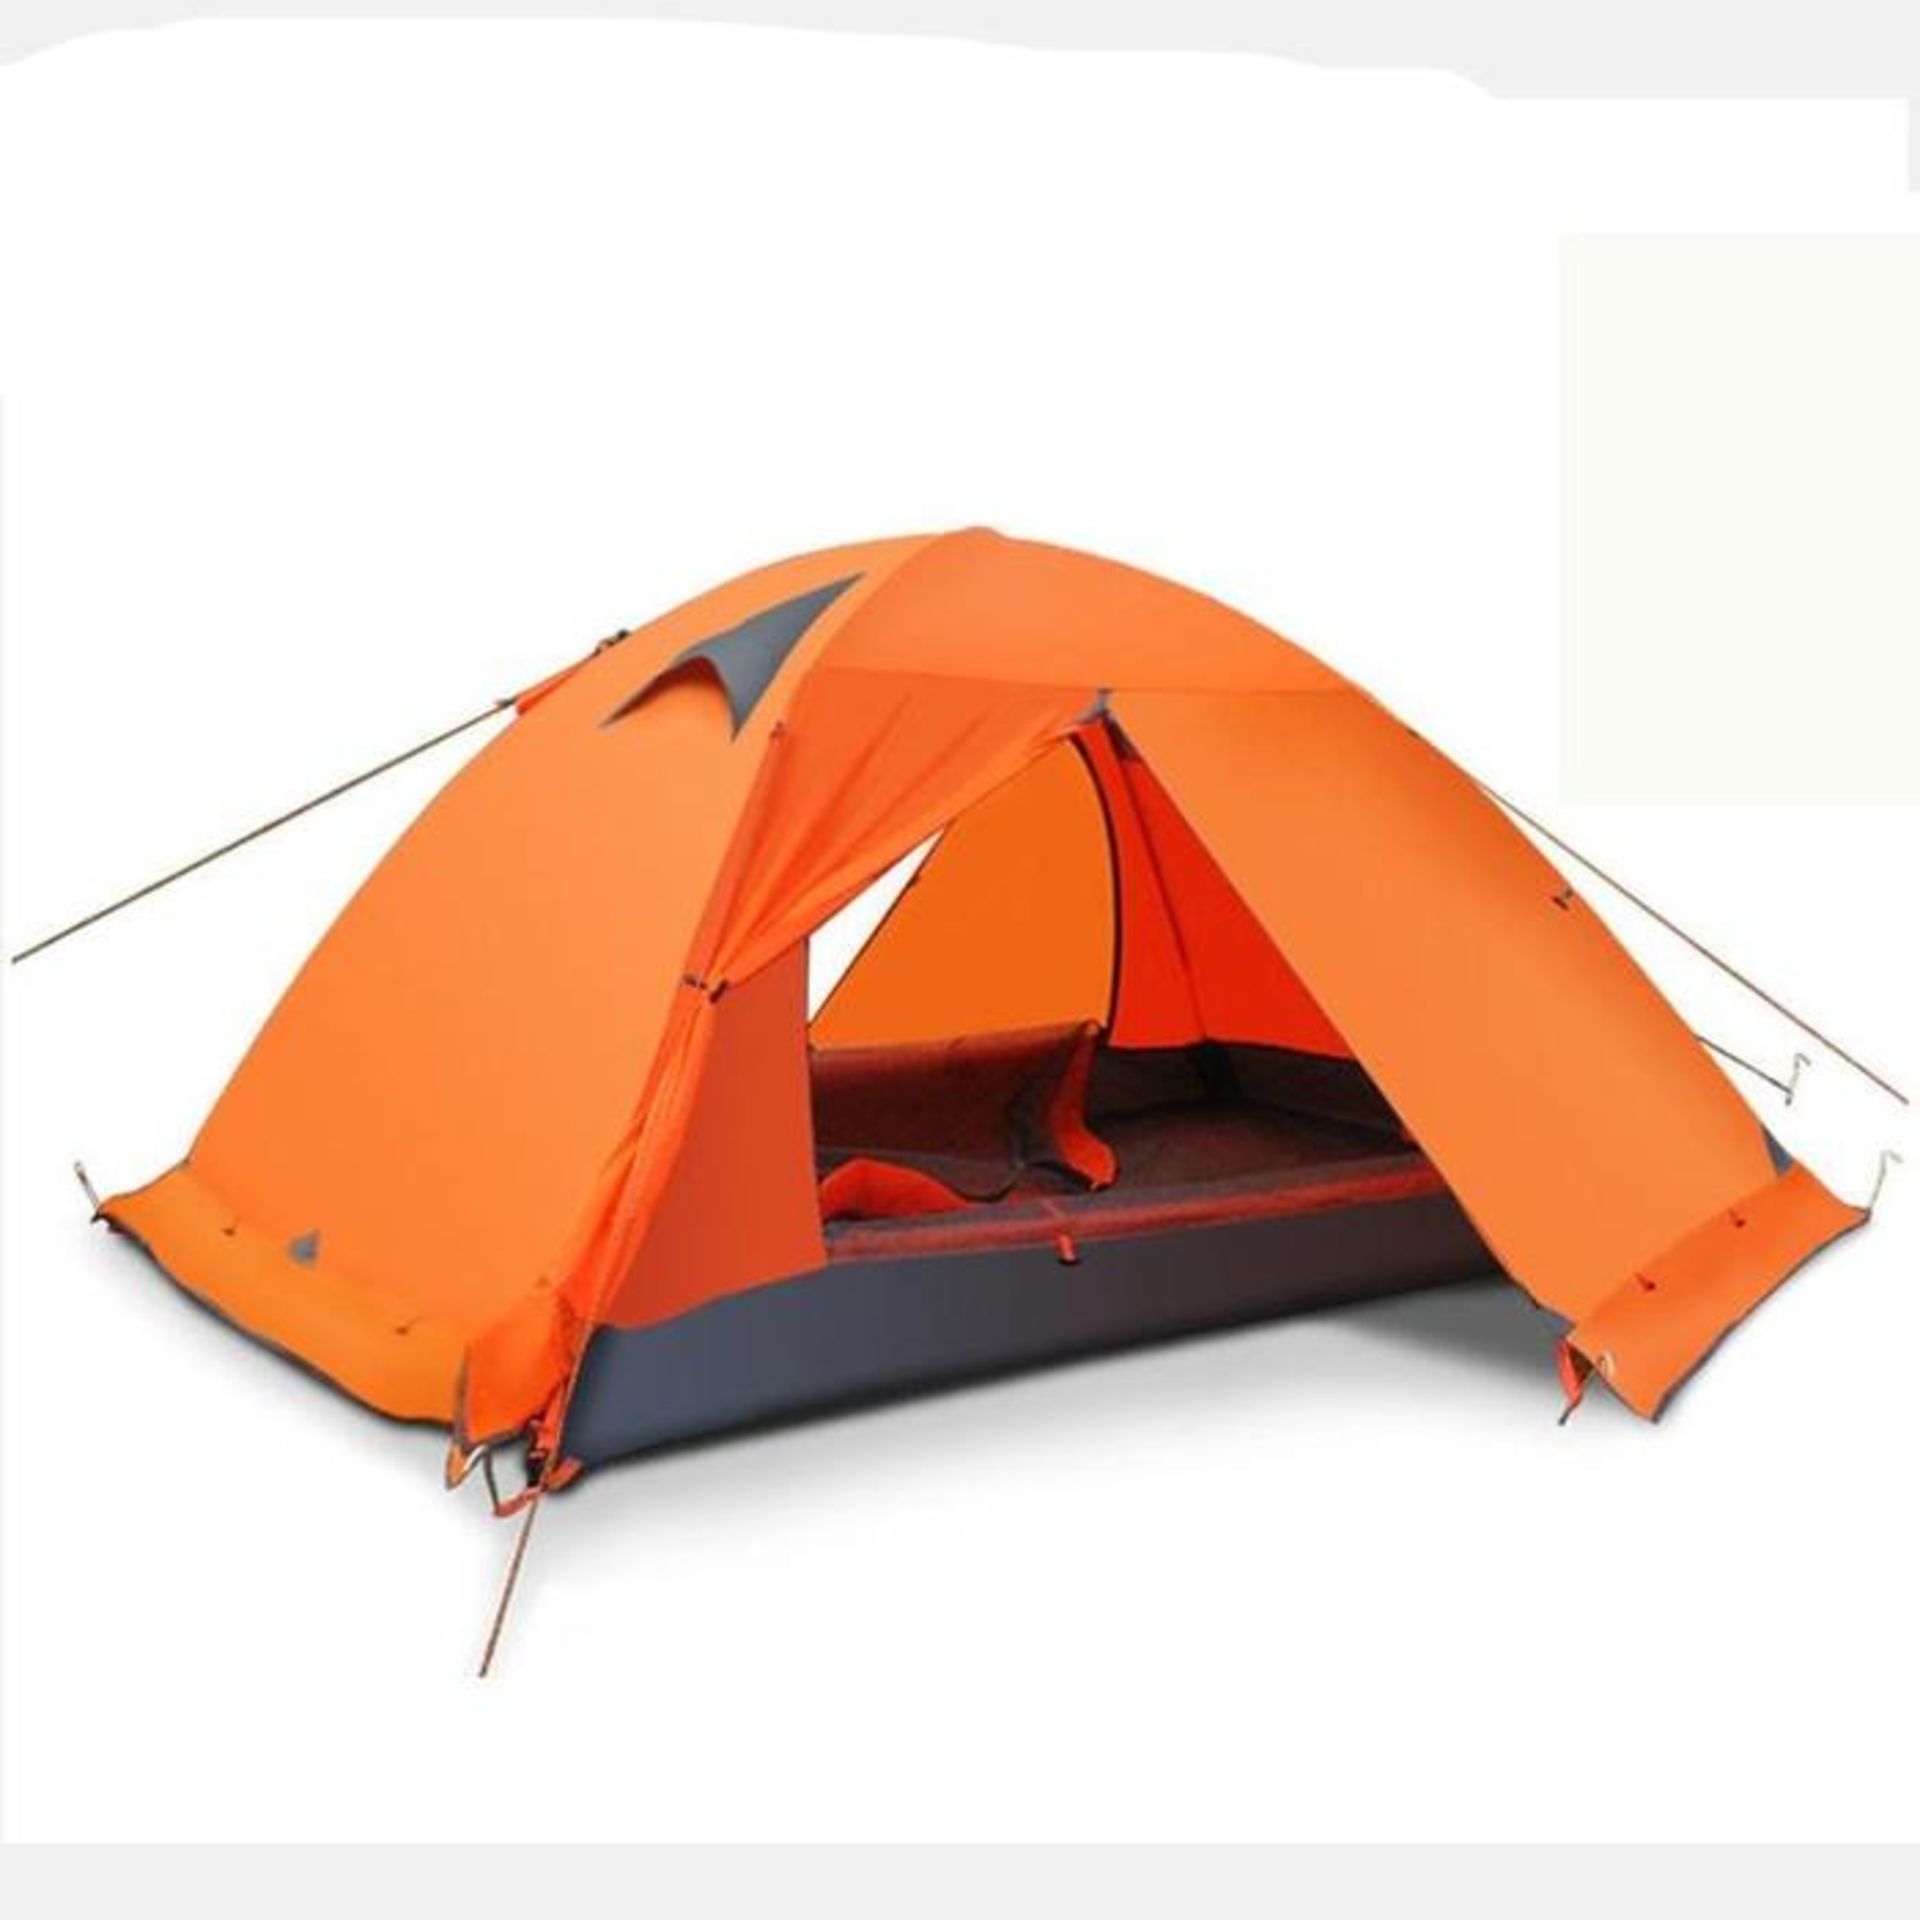 Hot Selling Waterproof 3-4 Person Outdoor Camping Backpacking Oxford Tent